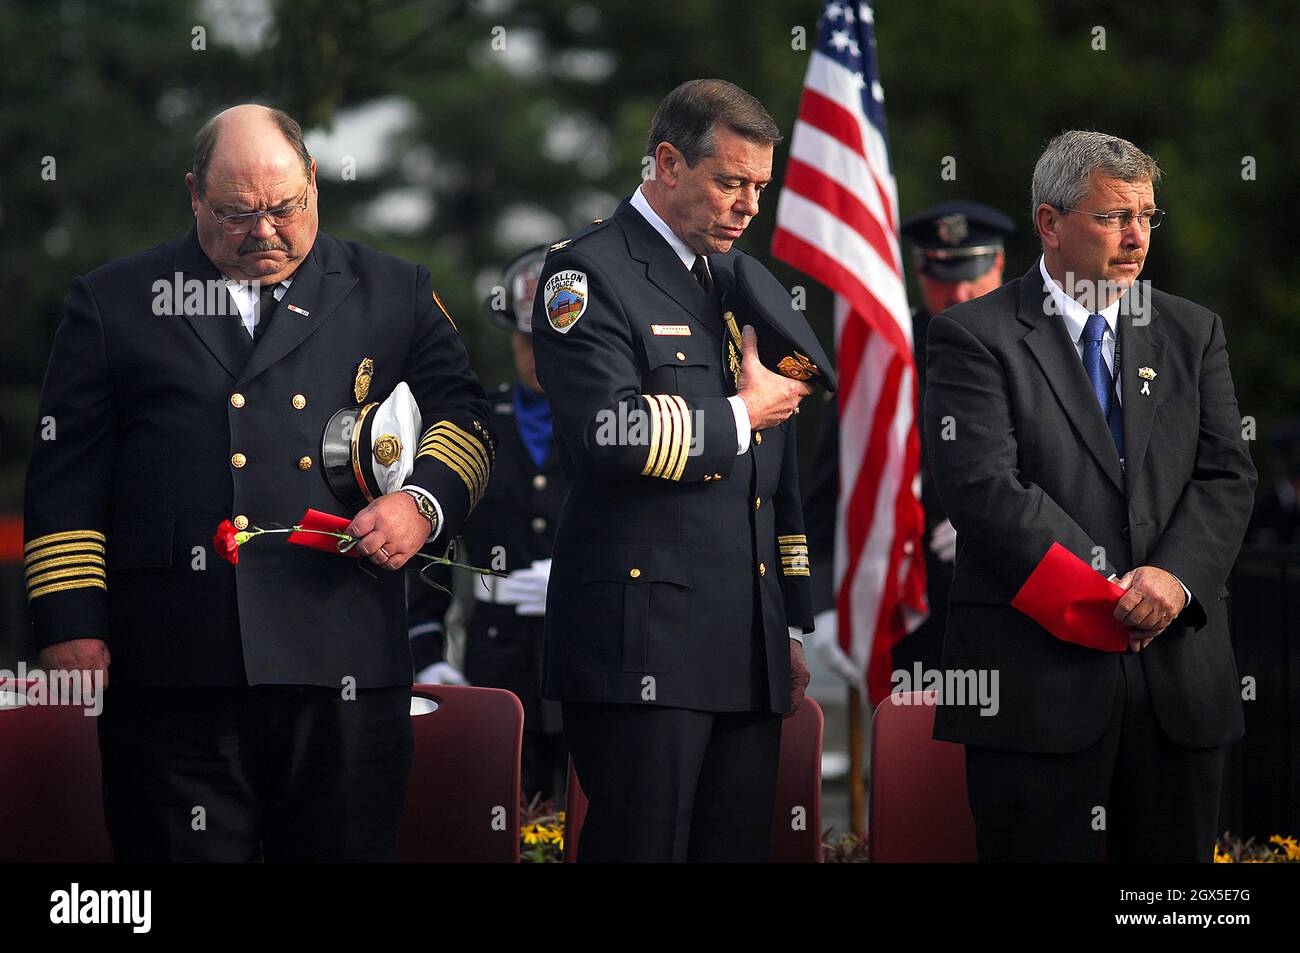 A Tribute to First Responders during the Patriot Day event in O'Fallon, Missouri USA Stock Photo